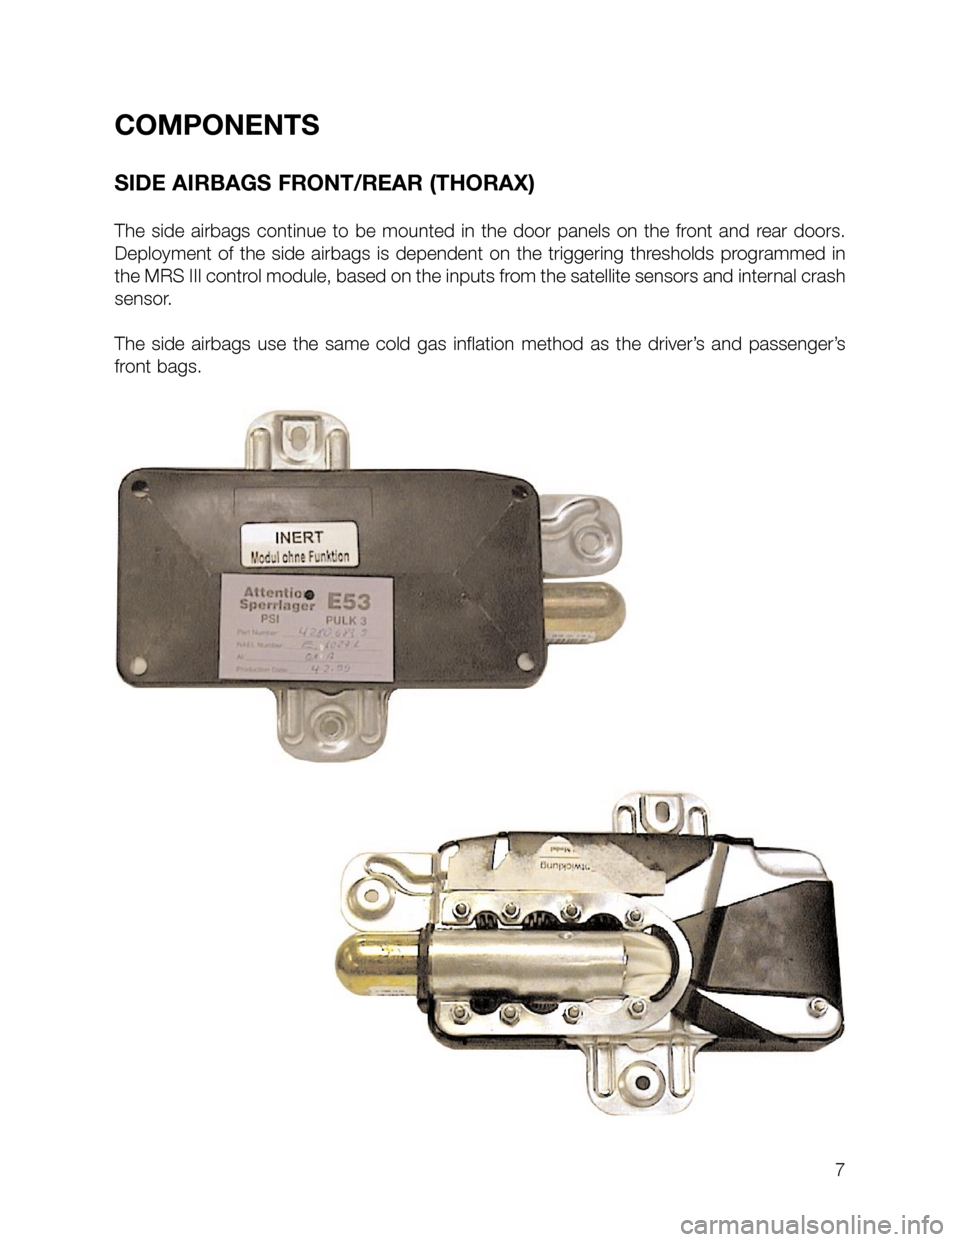 BMW 7 SERIES 1999 E38 MRSIII Multiple Restraint System Manual COMPONENTS
SIDE AIRBAGS FRONT/REAR (THORAX)
The side airbags continue to be mounted in the door panels on the front and rear doors.
Deployment of the side airbags is dependent on the triggering thresh